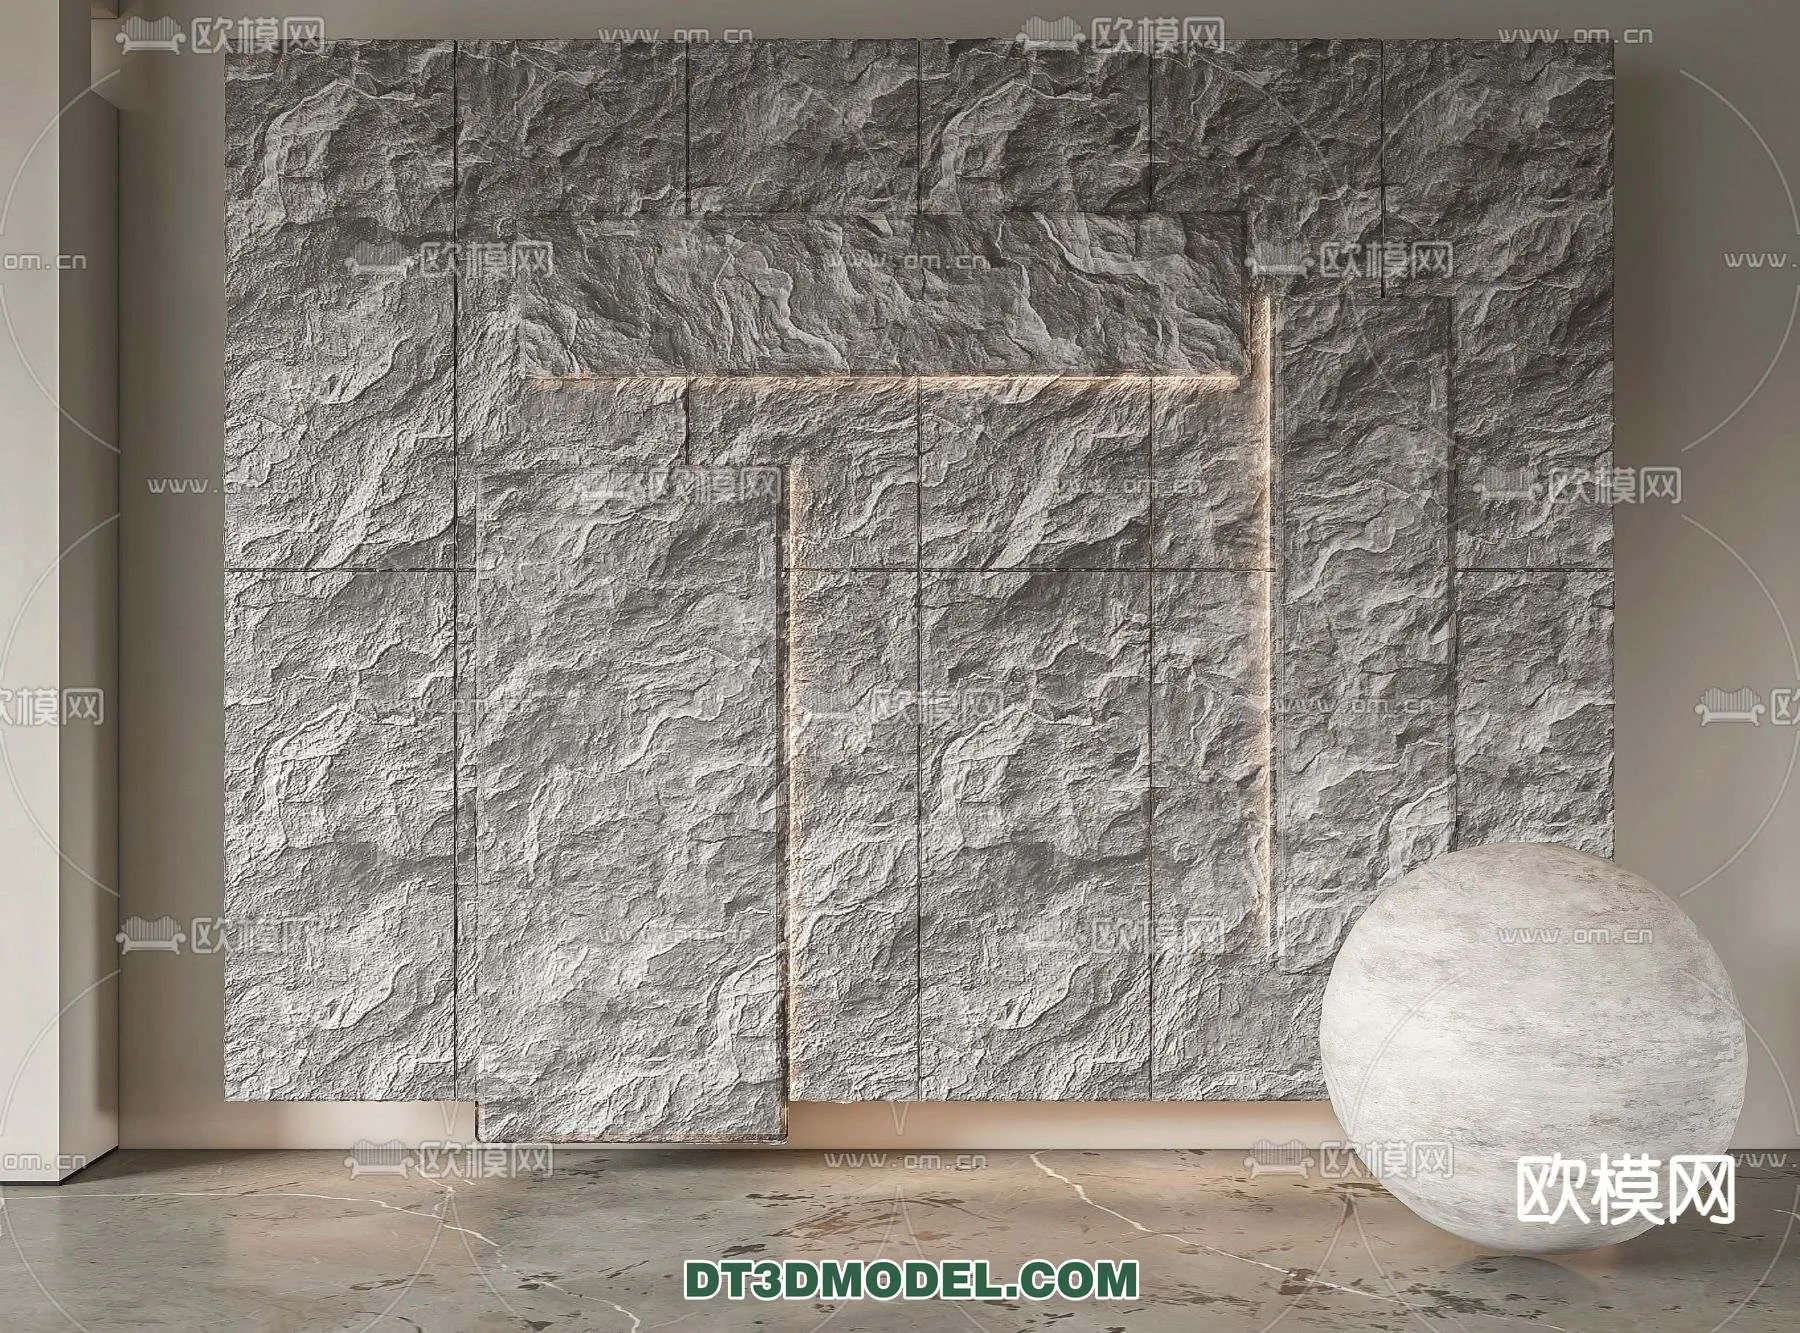 MATERIAL – TEXTURES – ROCK WALL – 0030